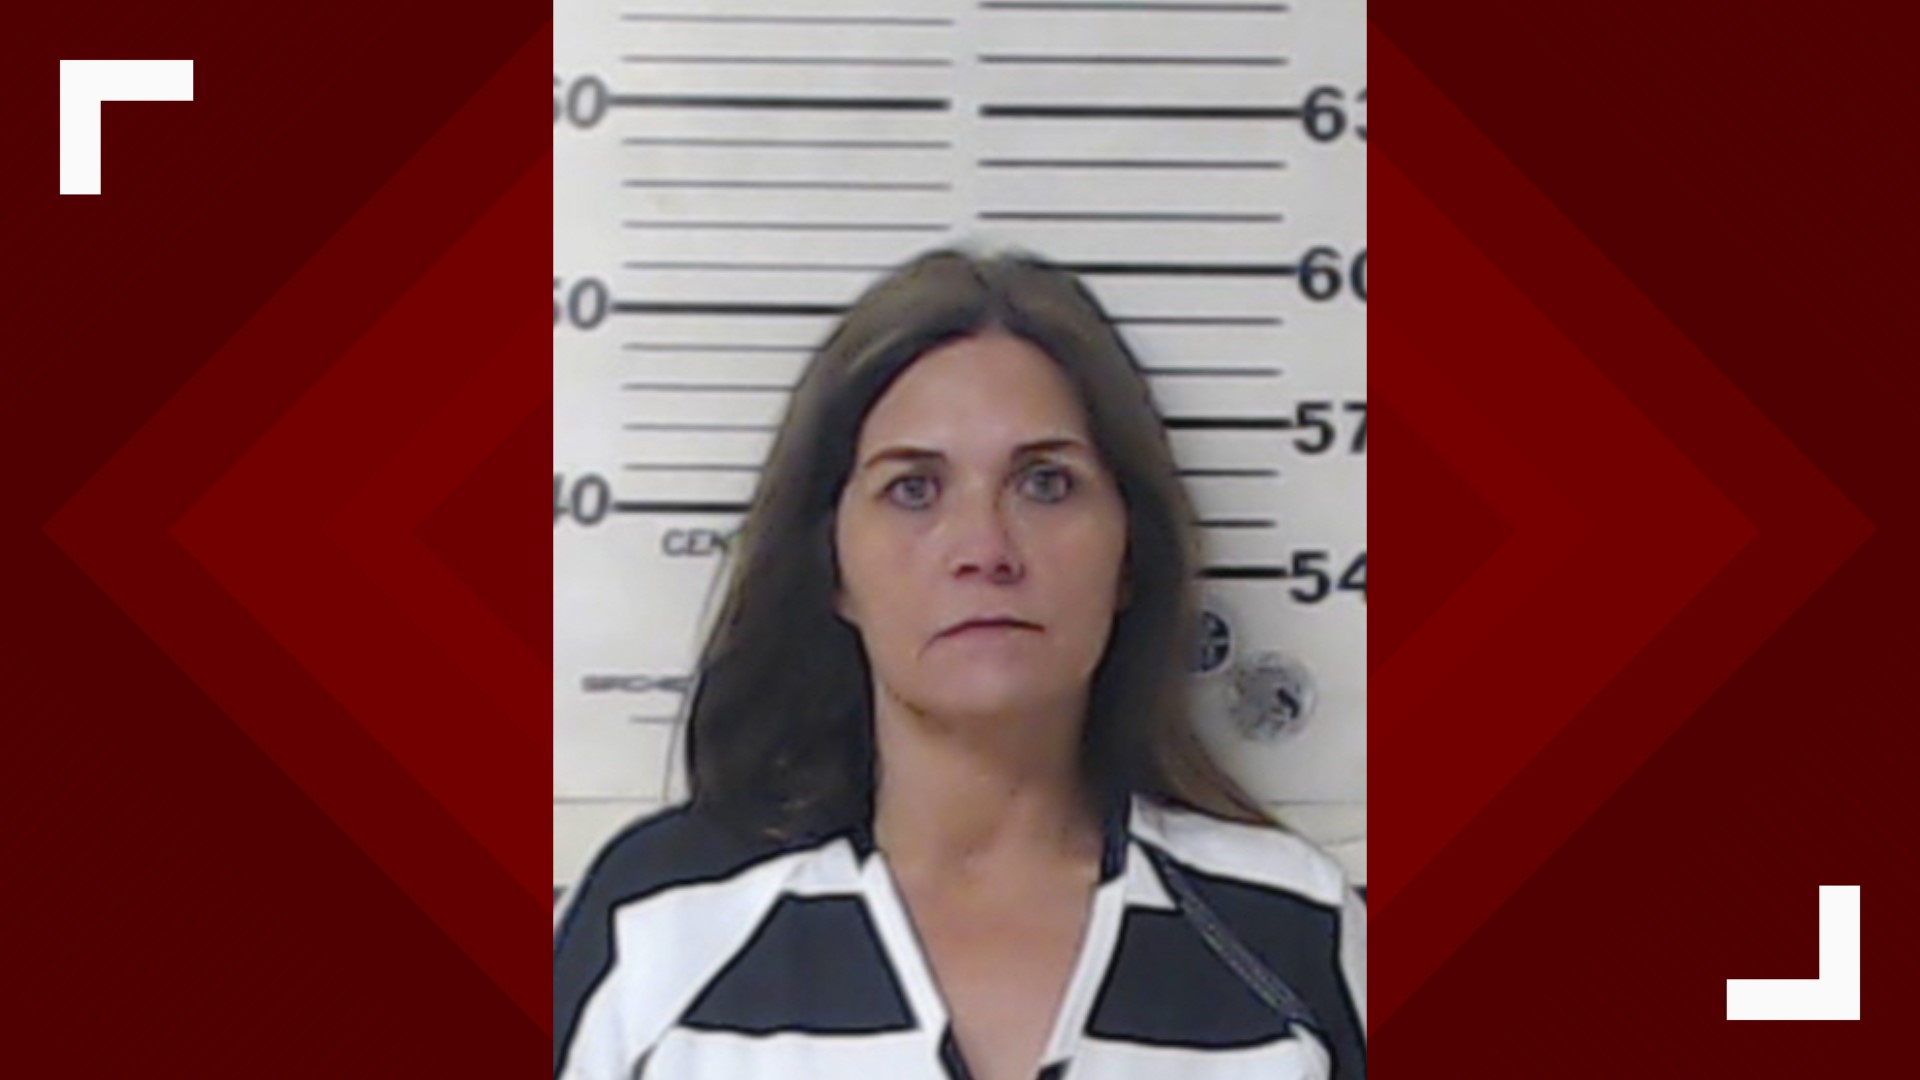 Henderson Co. Justice of the Peace clerk arrested during theft